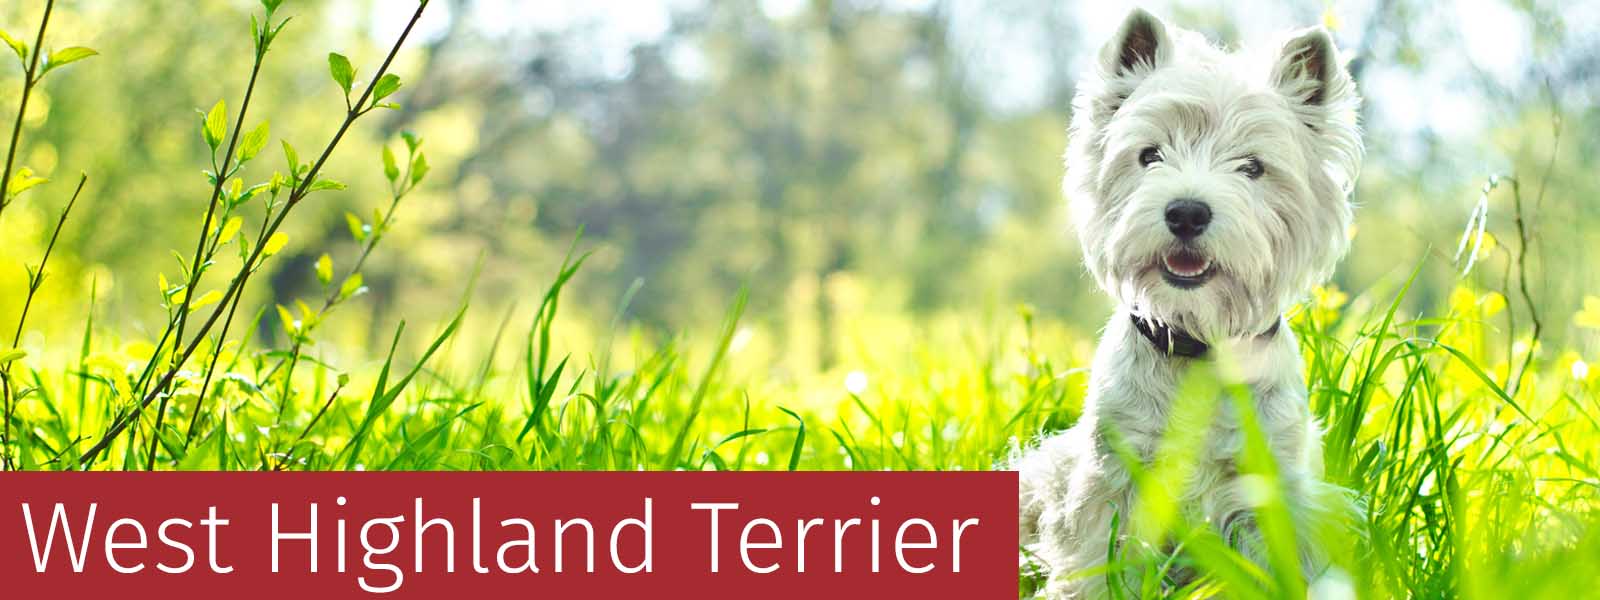 West Highland Terrier Gifts